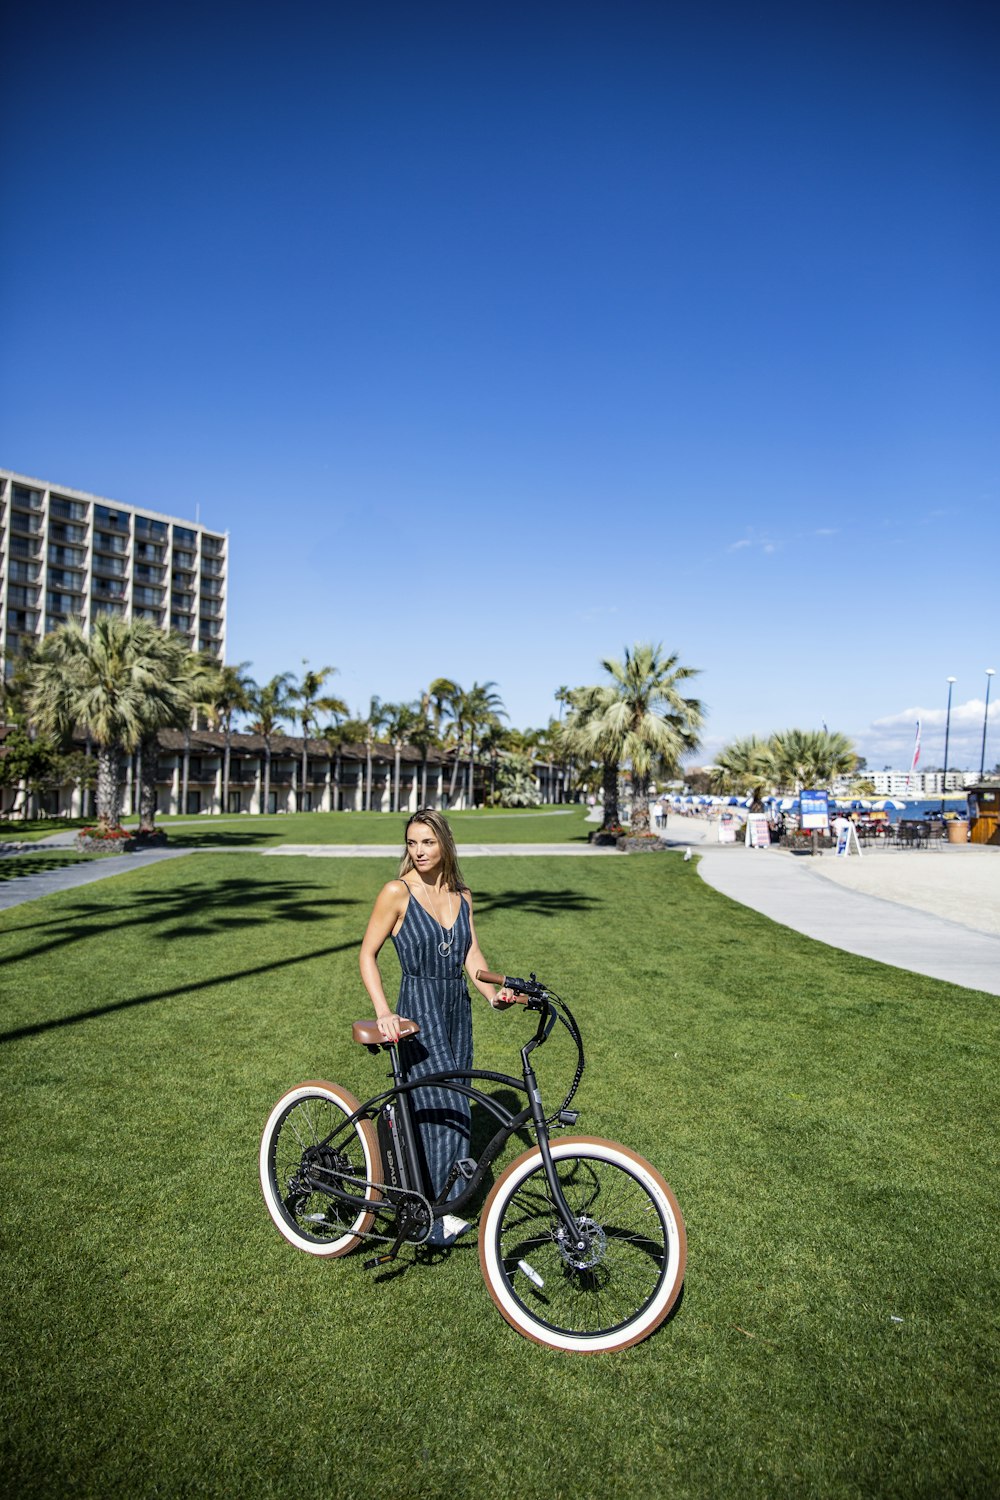 woman in black tank top riding on bicycle on green grass field during daytime